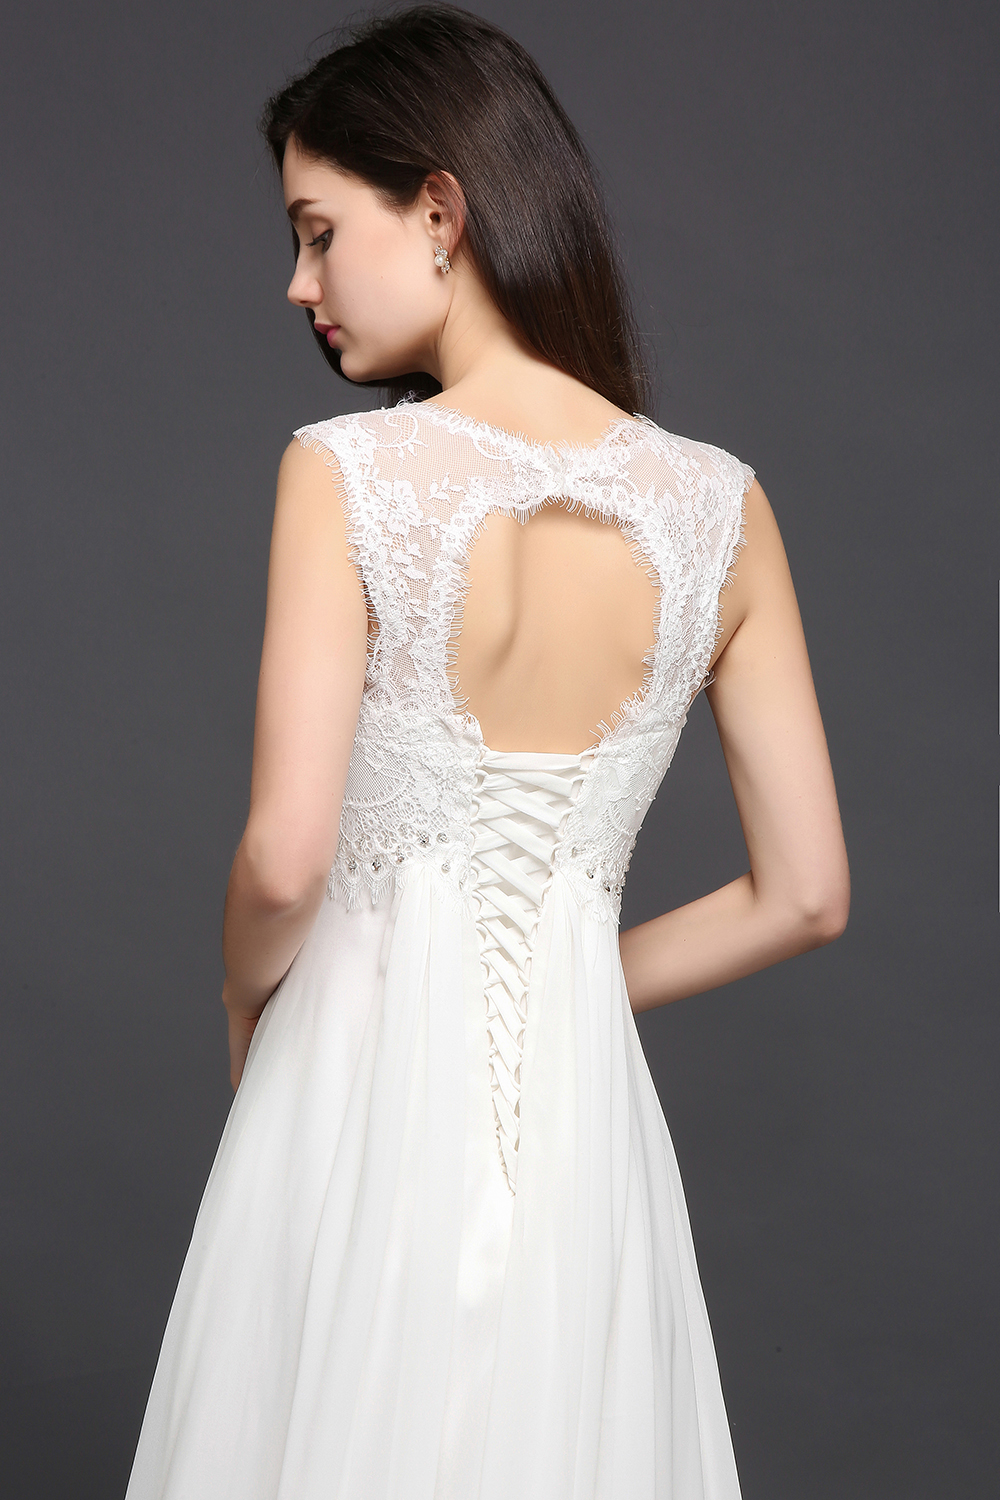 Women's Laced Bridal Dress with Open Back